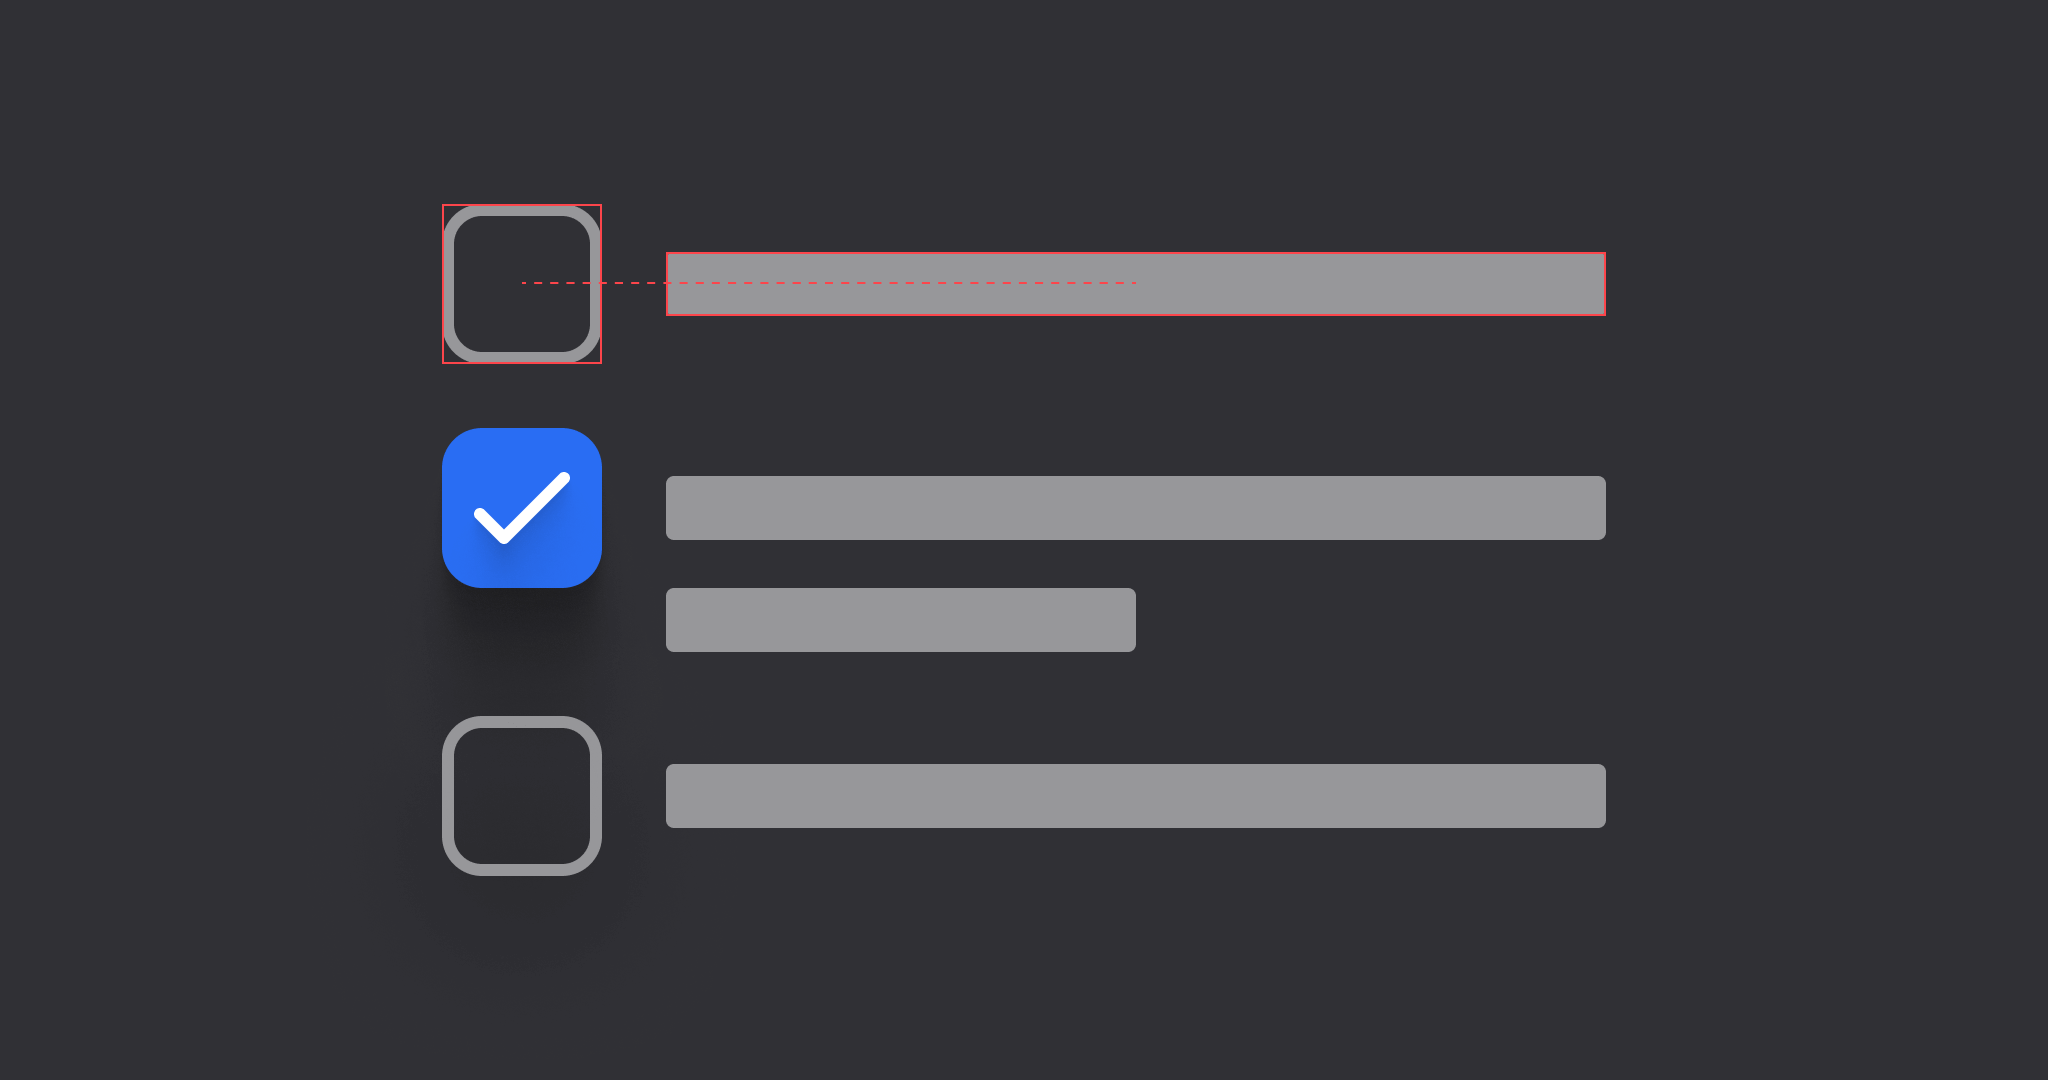 Custom, accessible radio/checkbox buttons with perfect alignment | CodyHouse